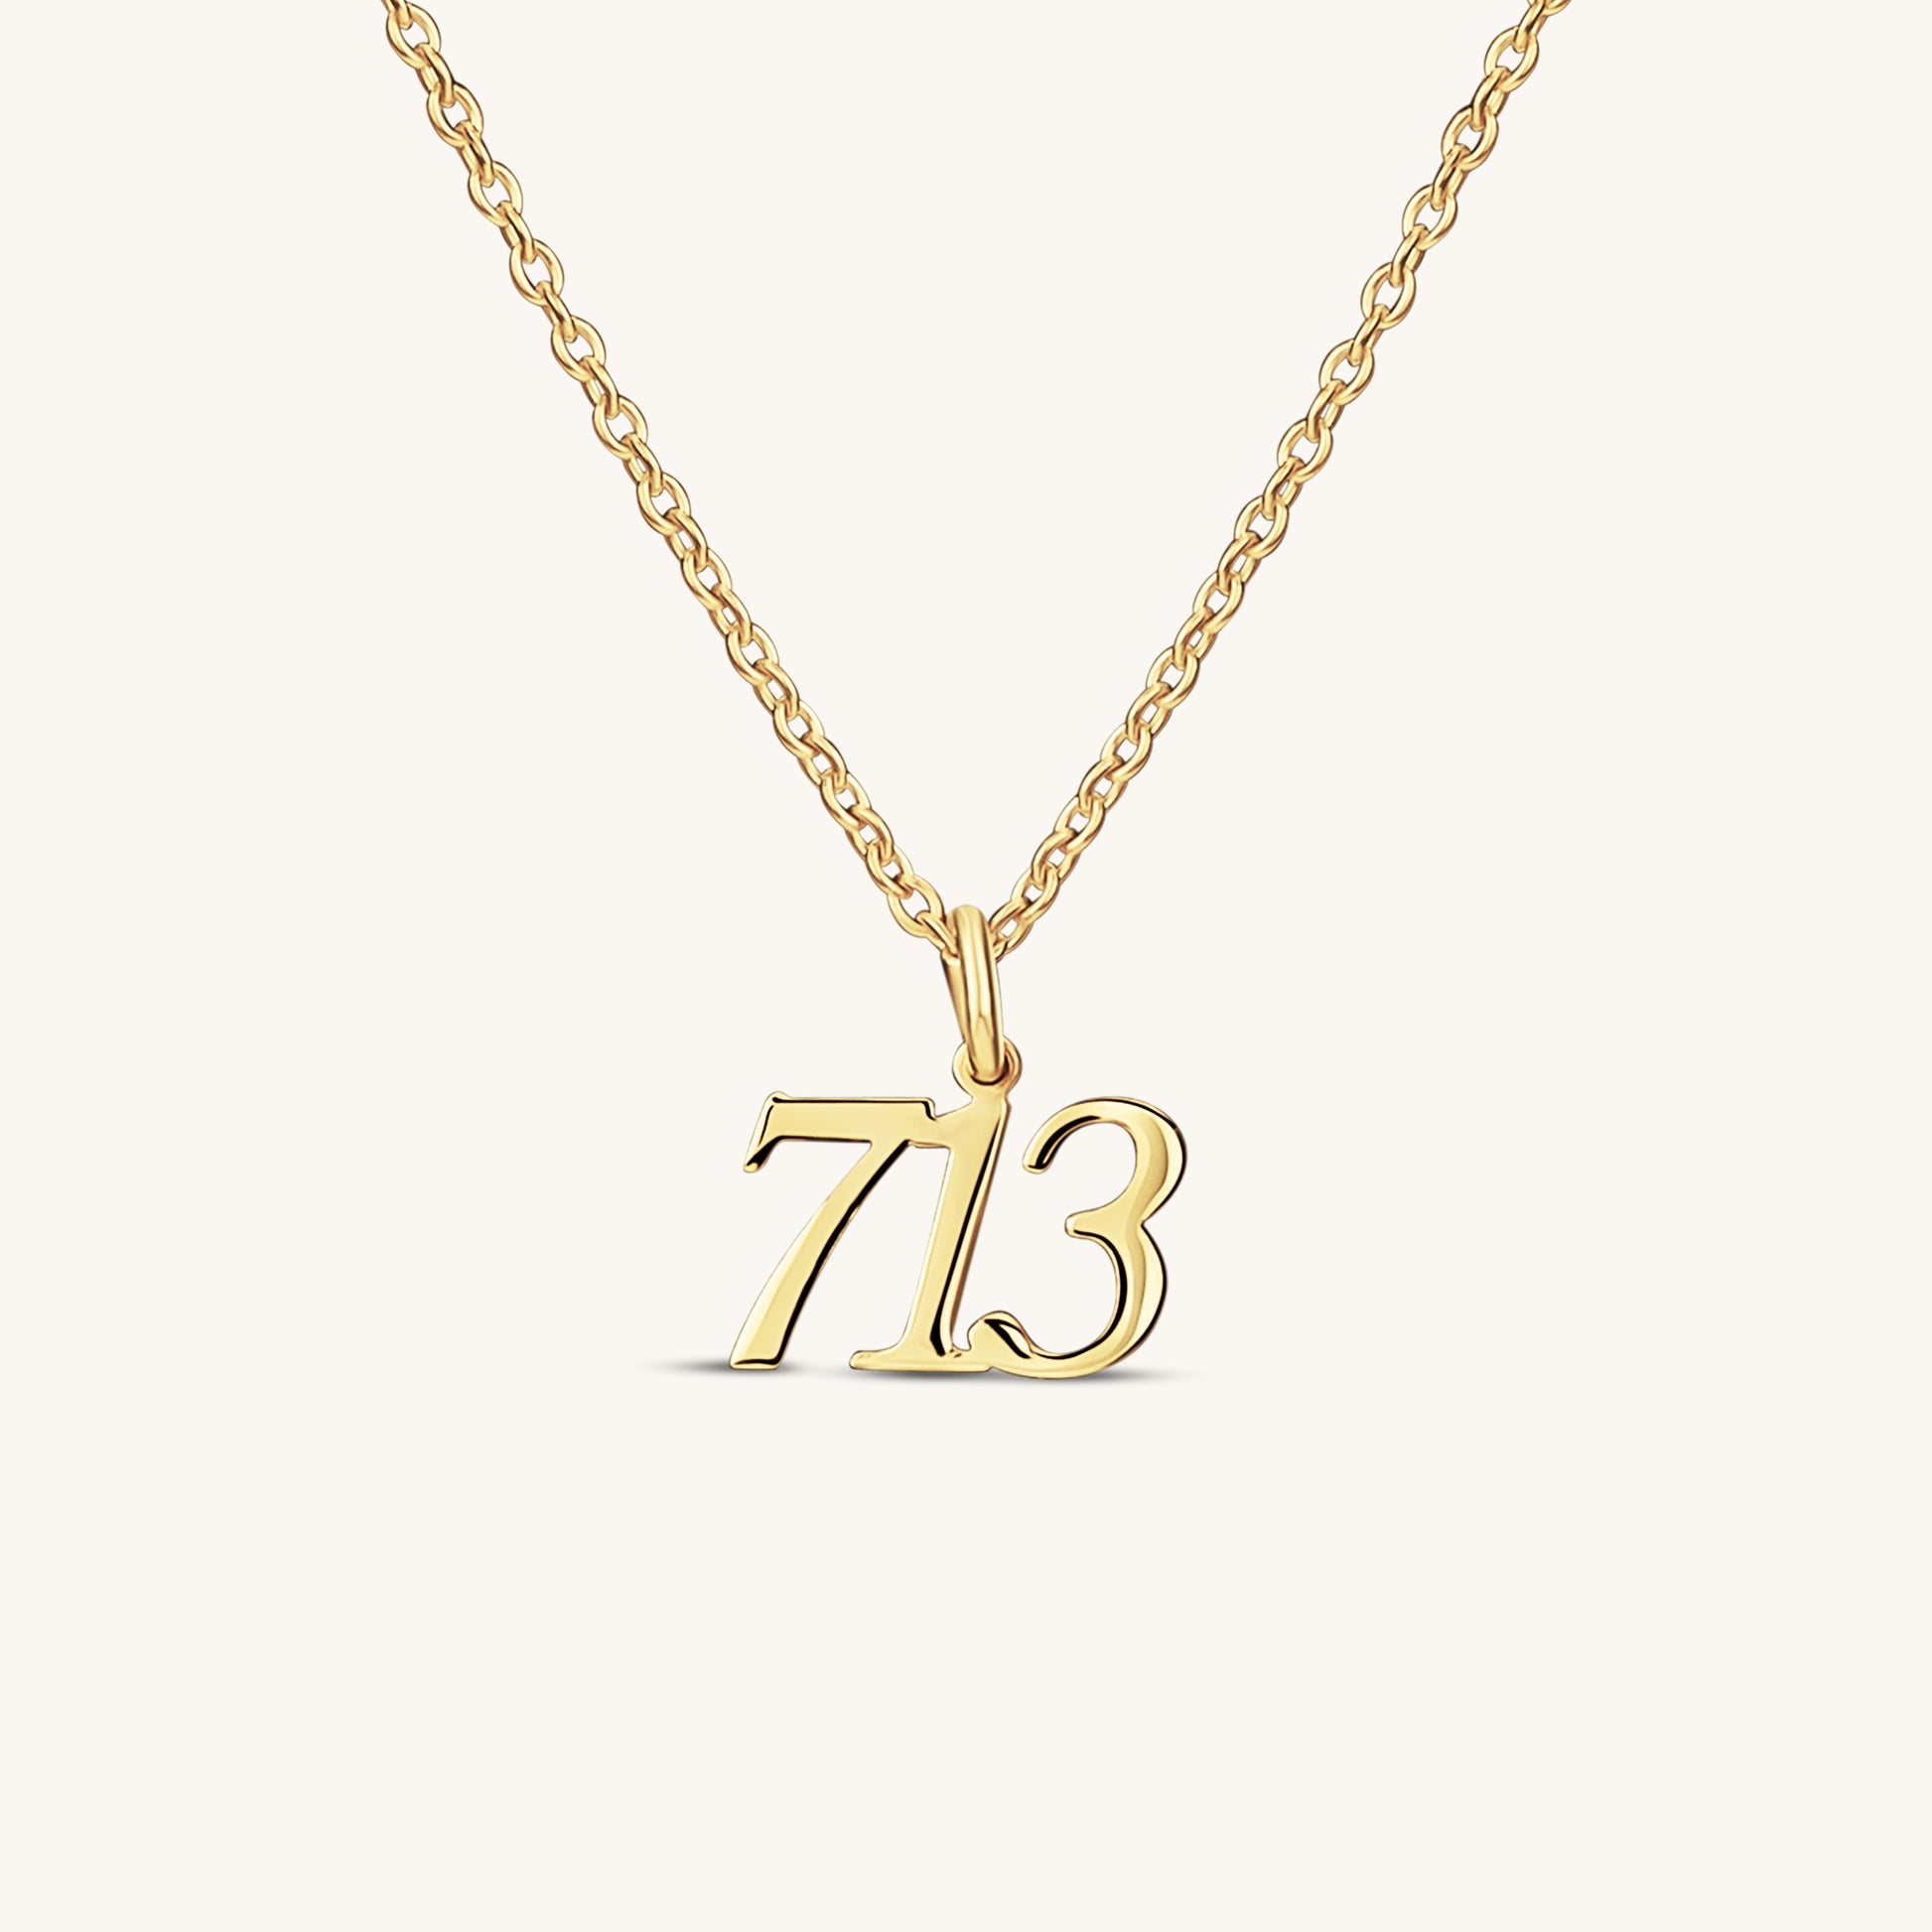 Area Code Number Necklace - Keepsakes